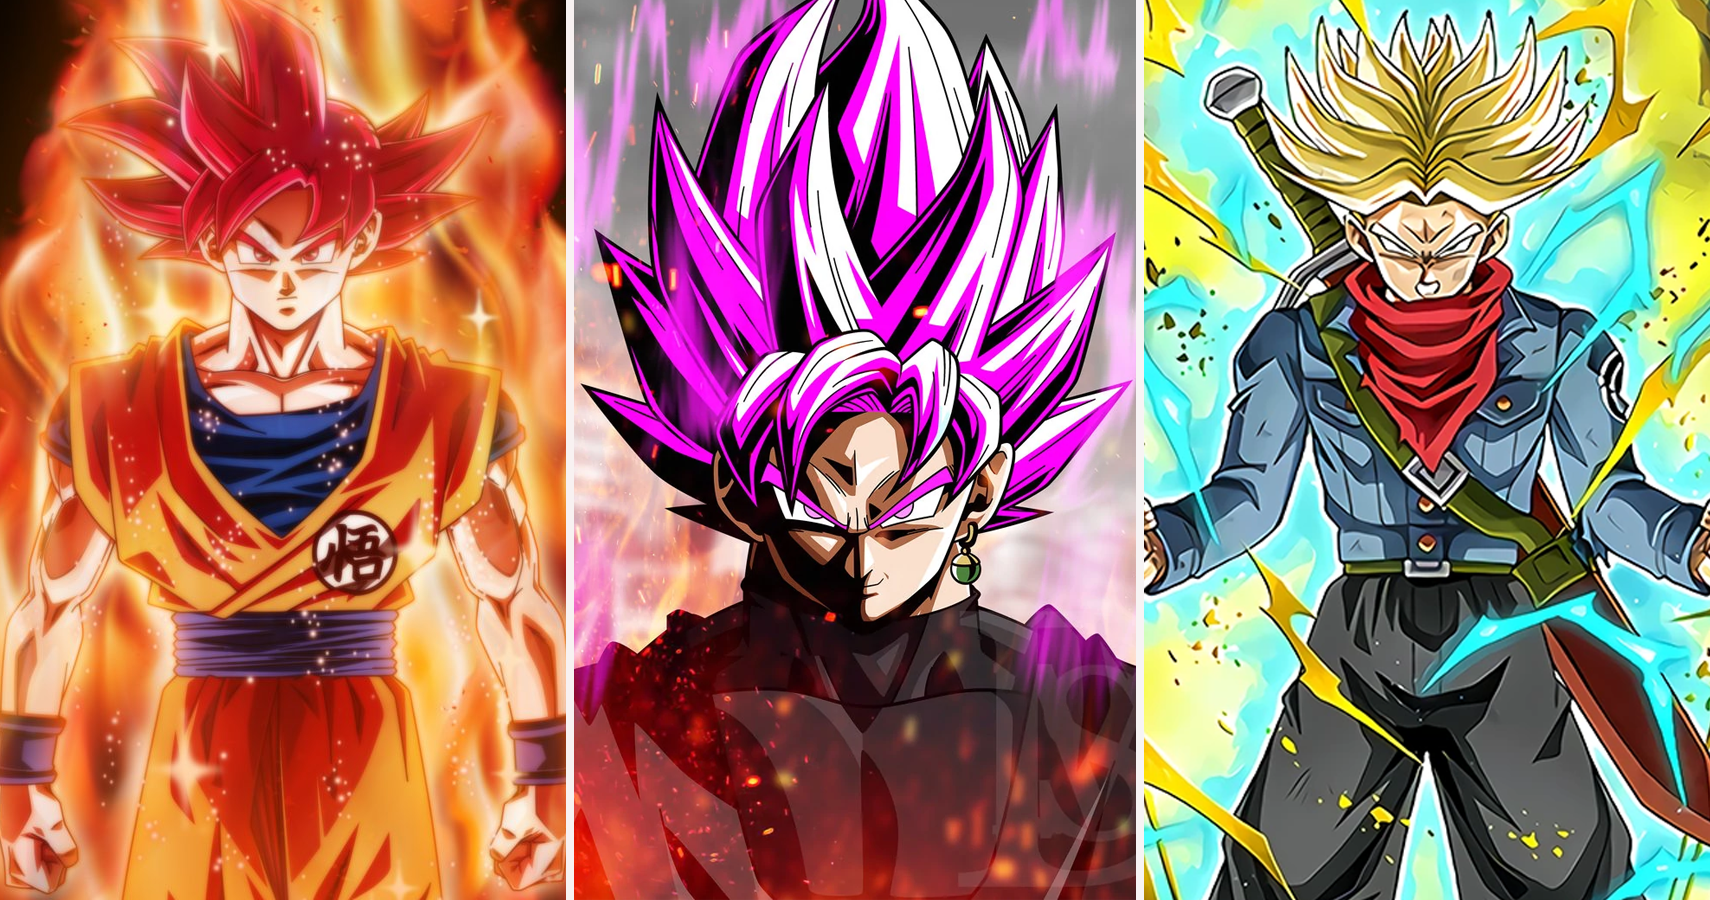 Super Saiyan 3 Proves Goku is More Powerful Dead Than Alive